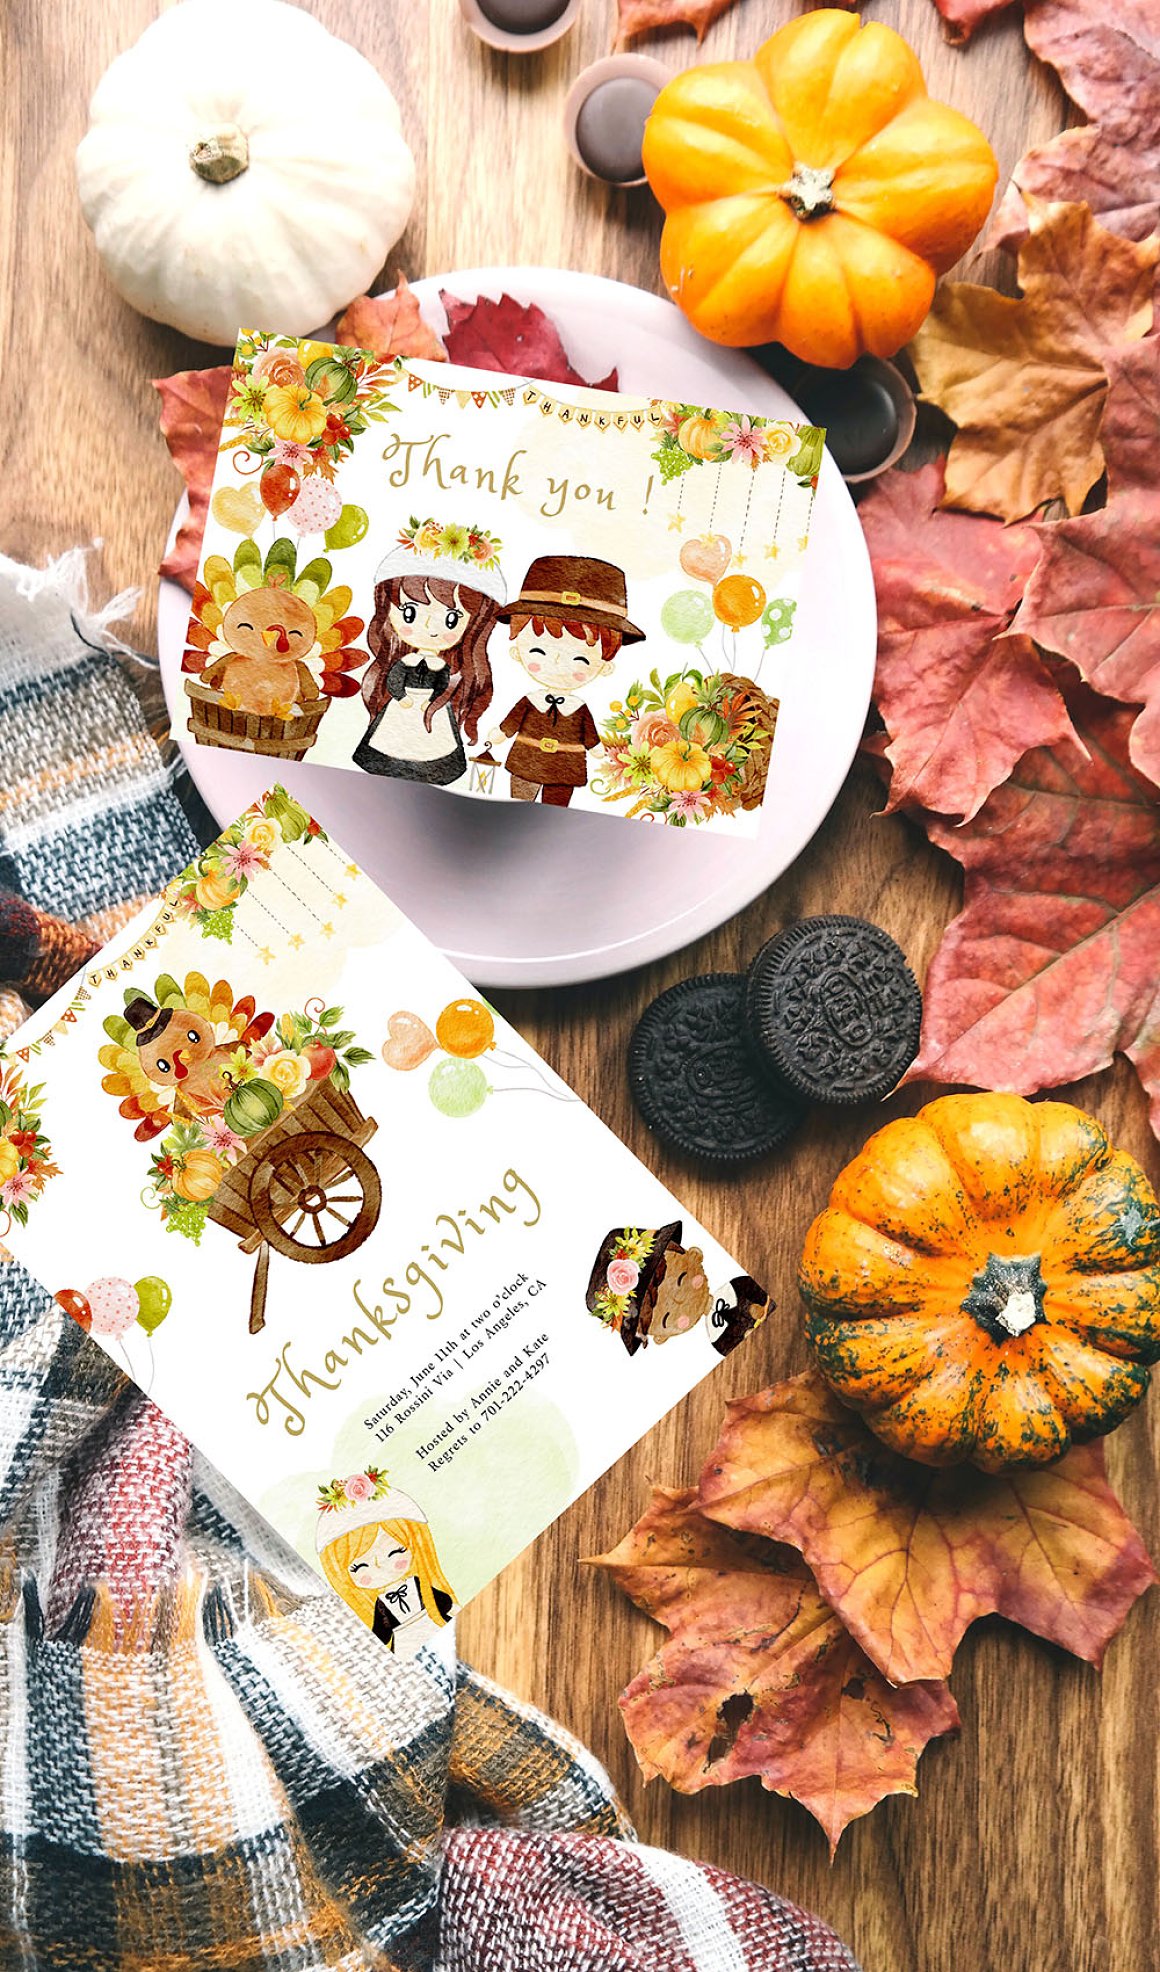 Festive greeting card with Thanksgiving illustration.